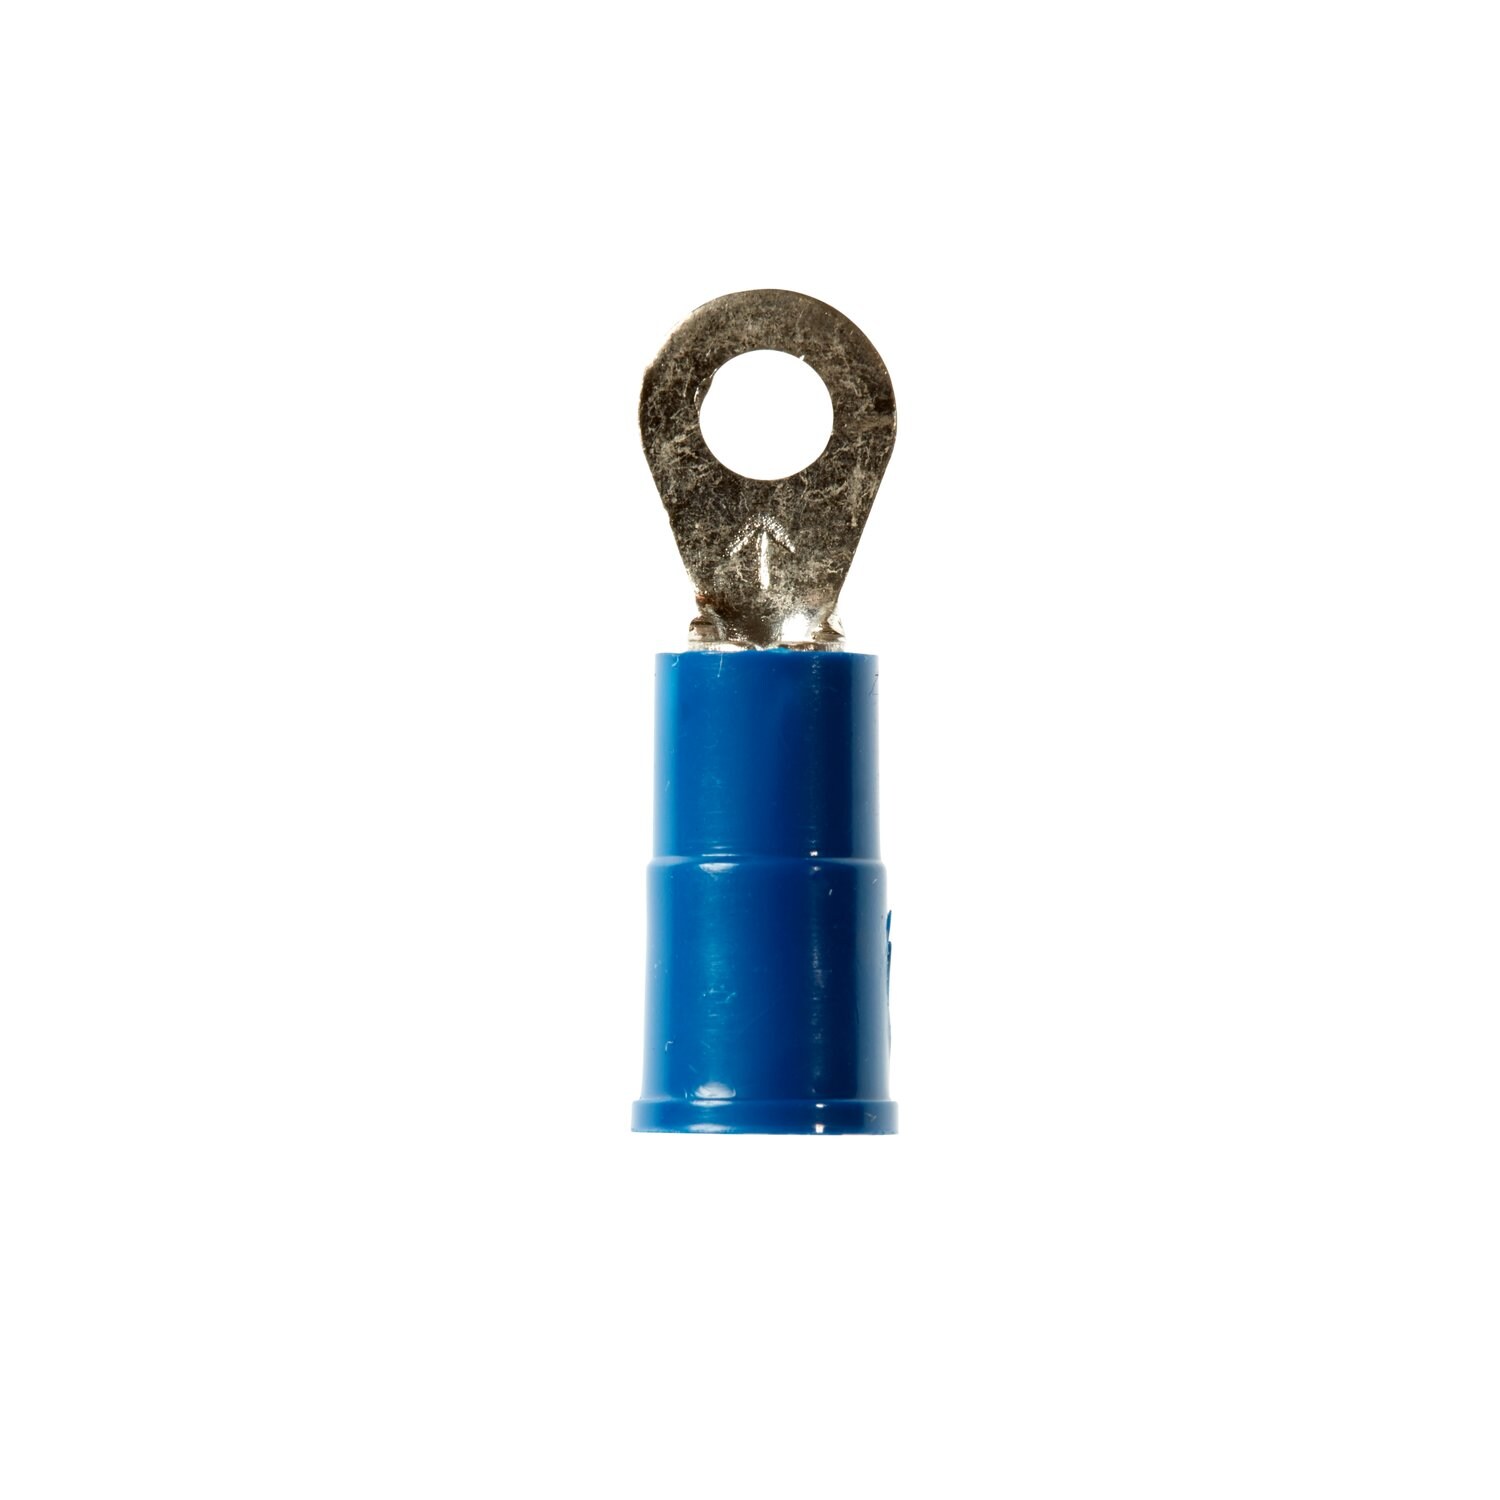 7100165249 - 3M Scotchlok Ring Vinyl Insulated, 100/bottle, MV14-4R/SX,
standard-style ring tongue fits around the stud, 500/Case